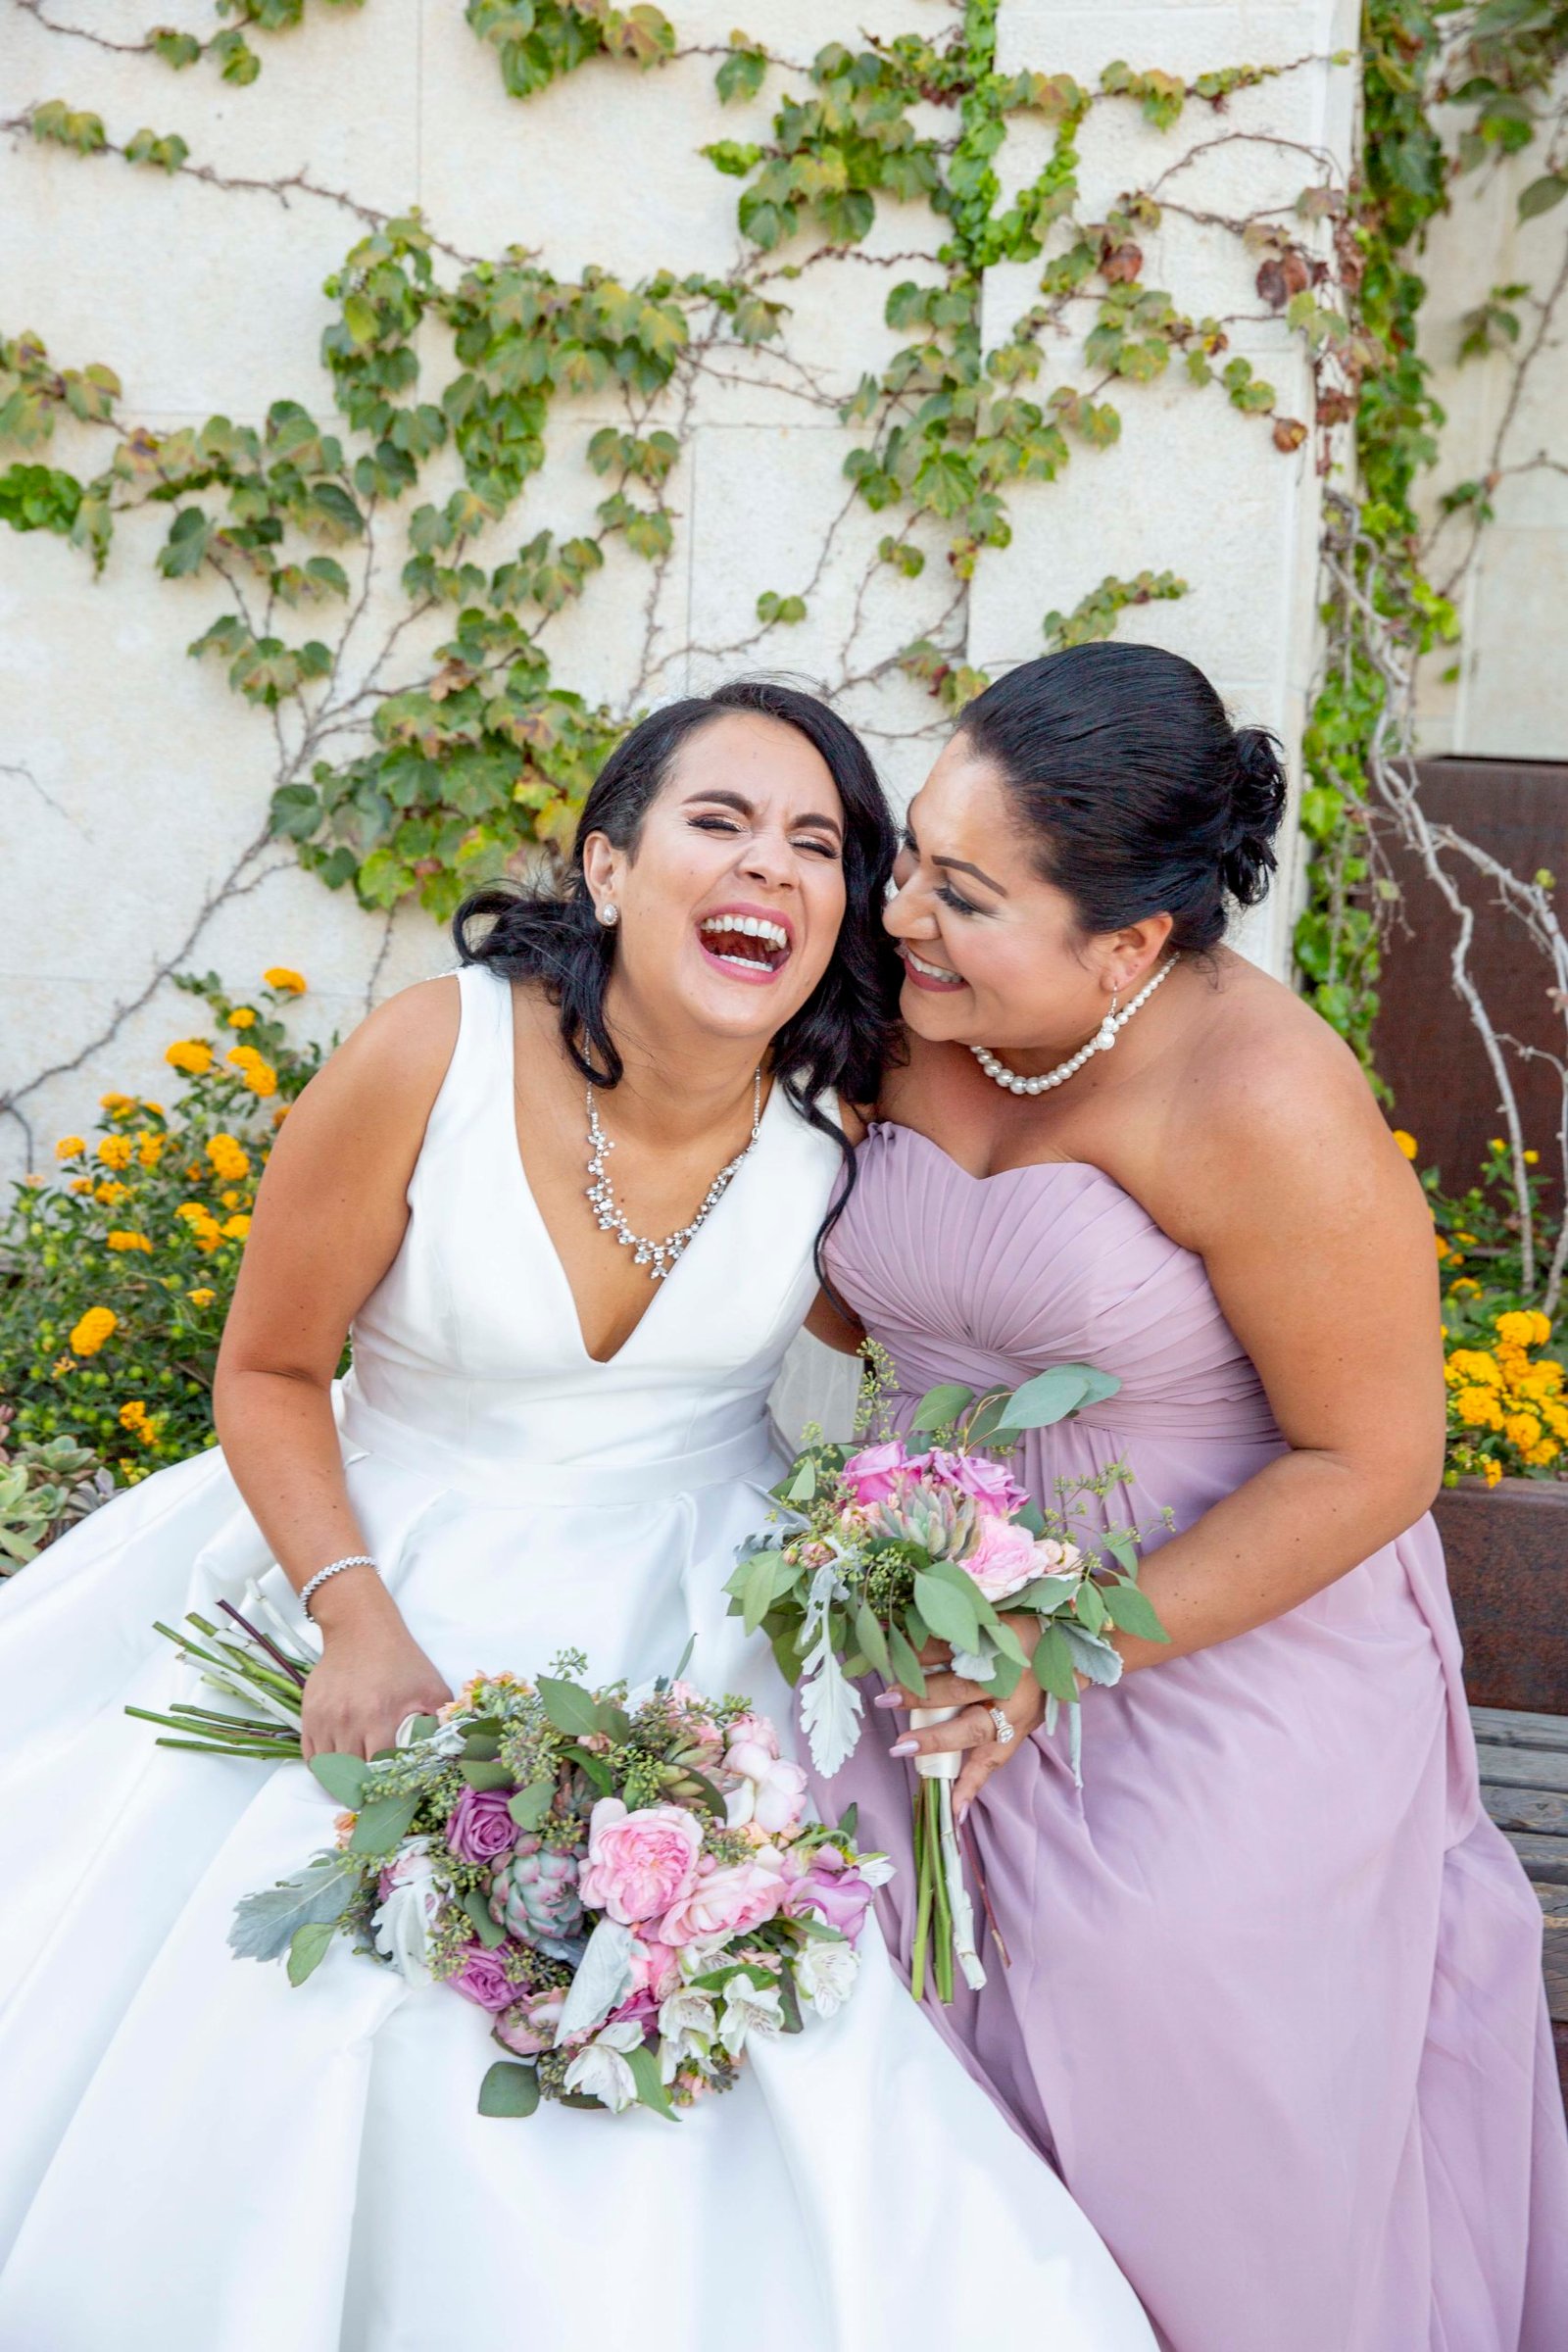 Bride laughing with a bridesmaid